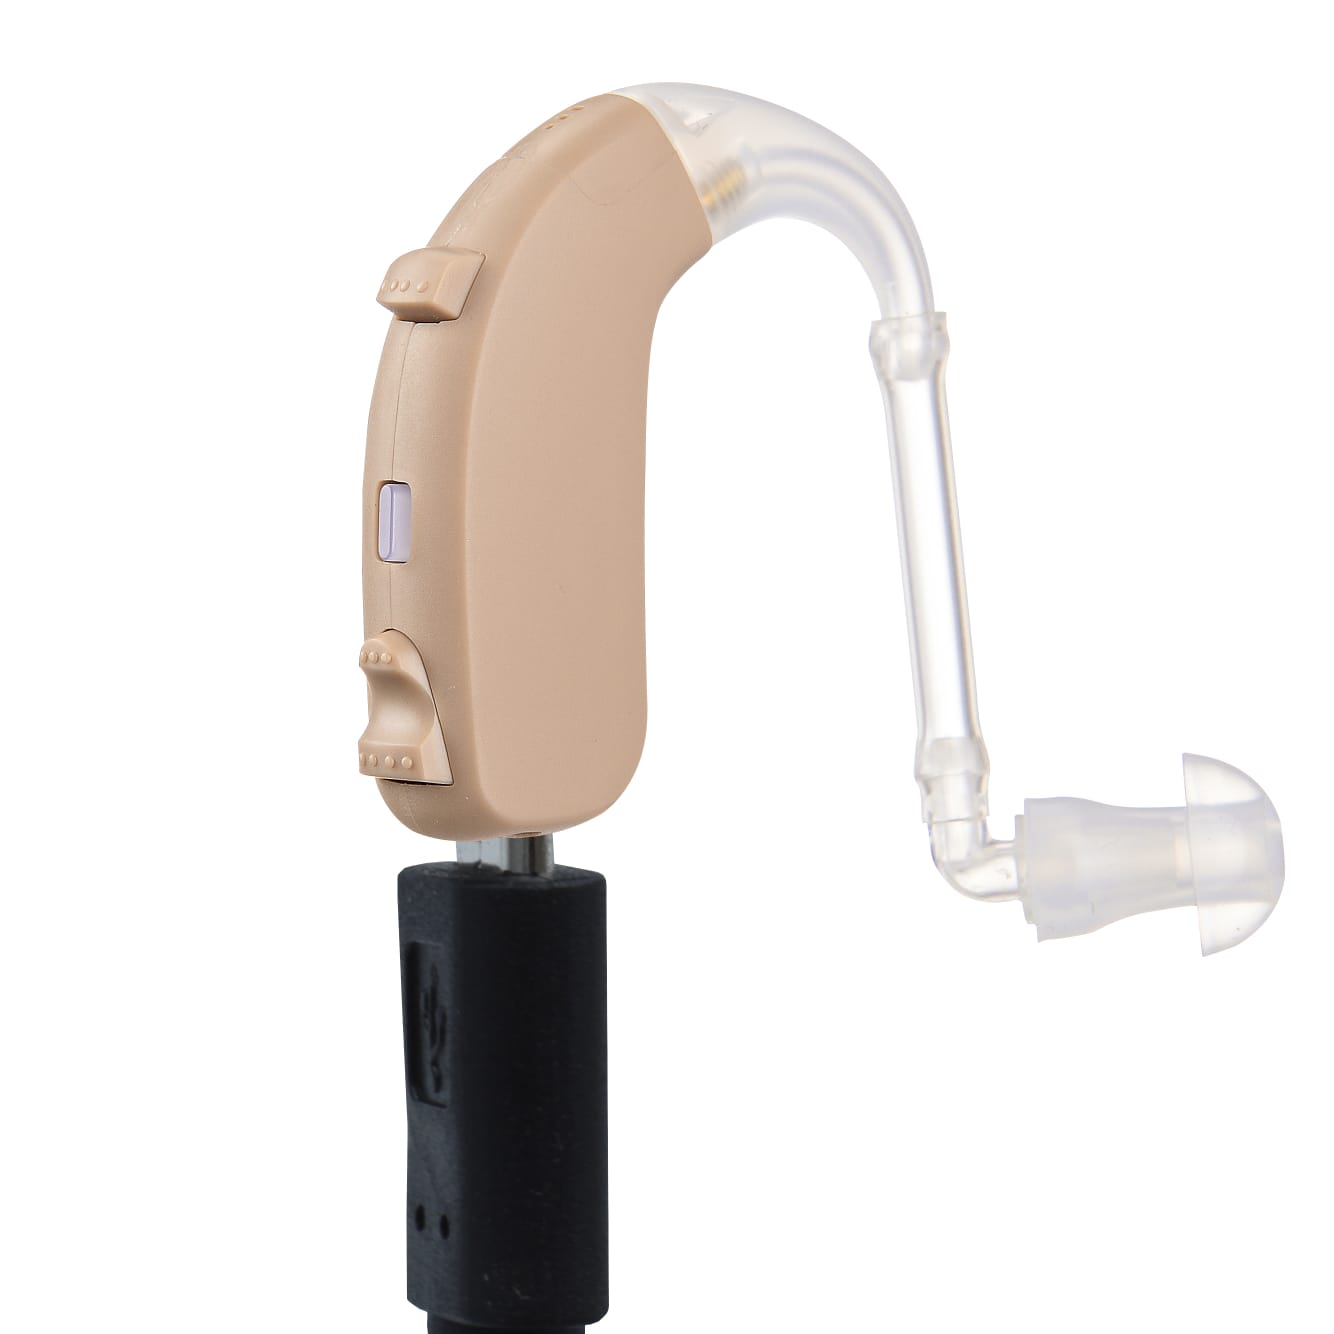 eEAR® Pair of BTE-26 Peak Gain 65db Improved Premium Behind The Ear BTE Rechargeable Digital Hearing Aid Designed for Severe Hearing Loss Designed and Engineered in the USA Sold 20,000+ worldwide